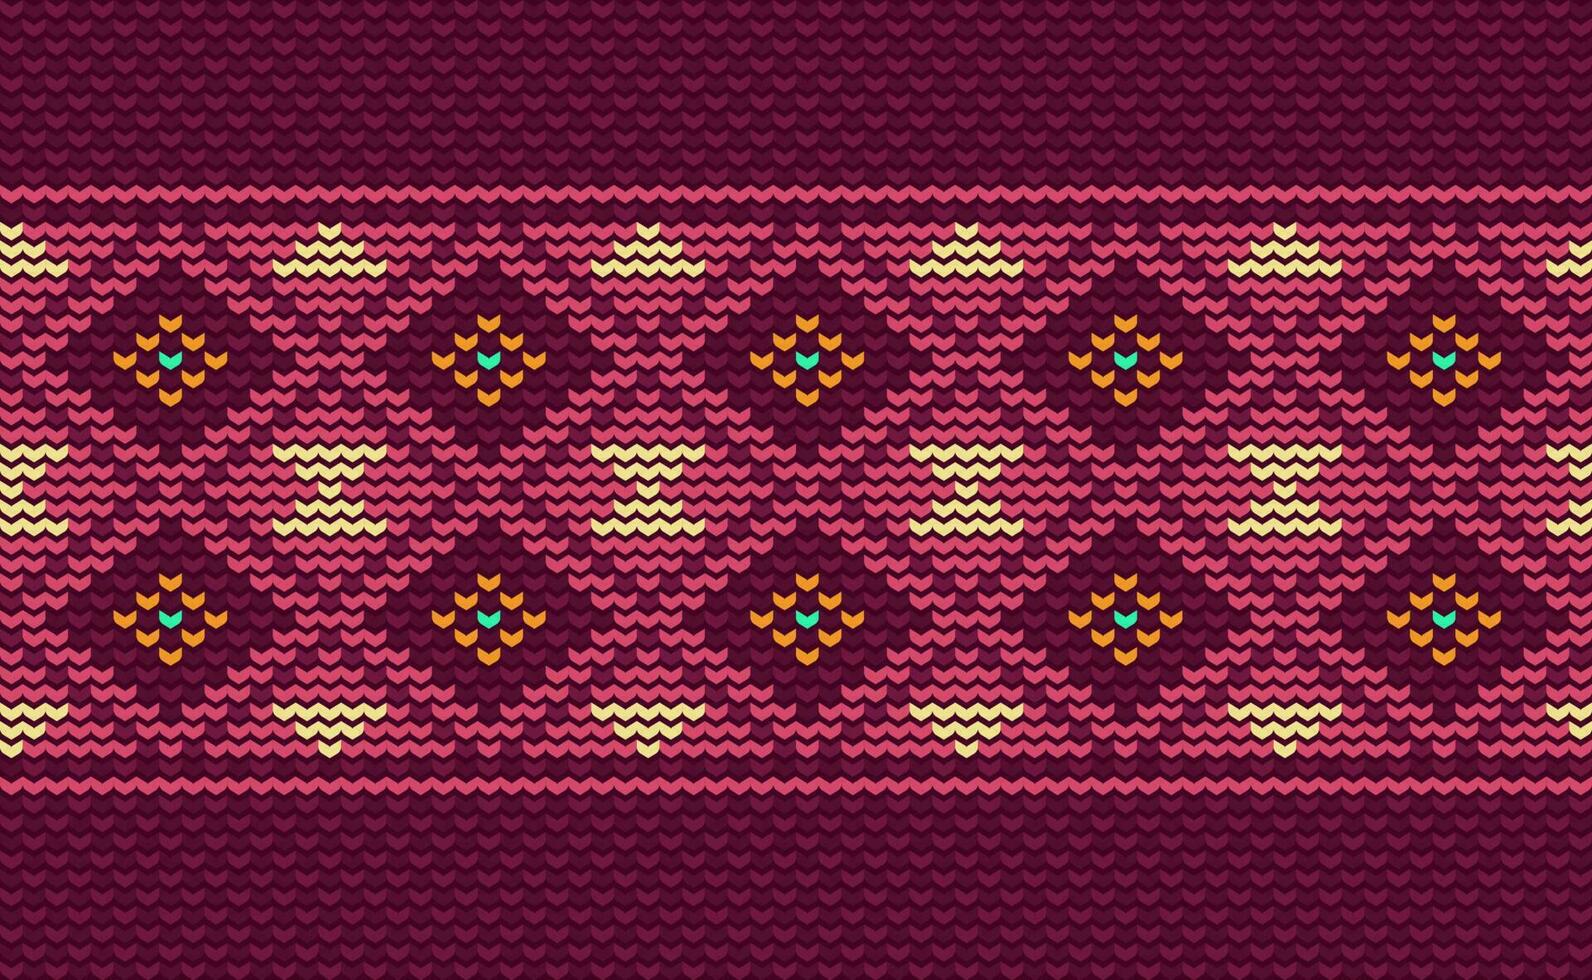 Crochet pattern, Vector cross stitch ornamental background, Knitted ethnic texture knitting style